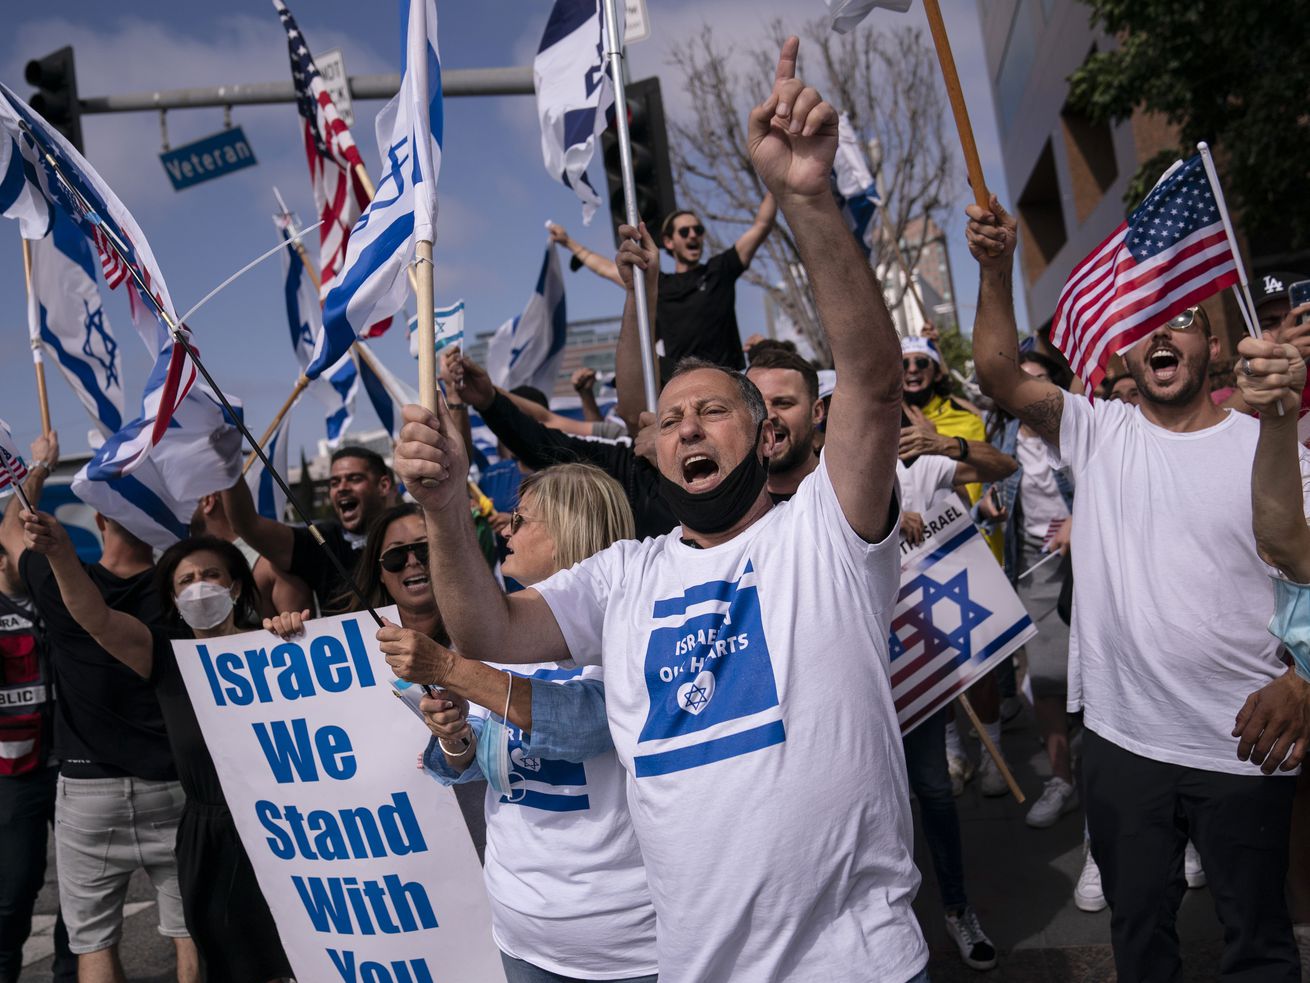 Pro-Israel supporters chant slogans during a rally in support of Israel outside the Federal Building in Los Angeles, Wednesday, May 12, 2021. A larger debate is playing out nationwide among many U.S. Jews who are divided over how to respond to the violence and over the disputed boundaries for acceptable criticism of Israeli policies.